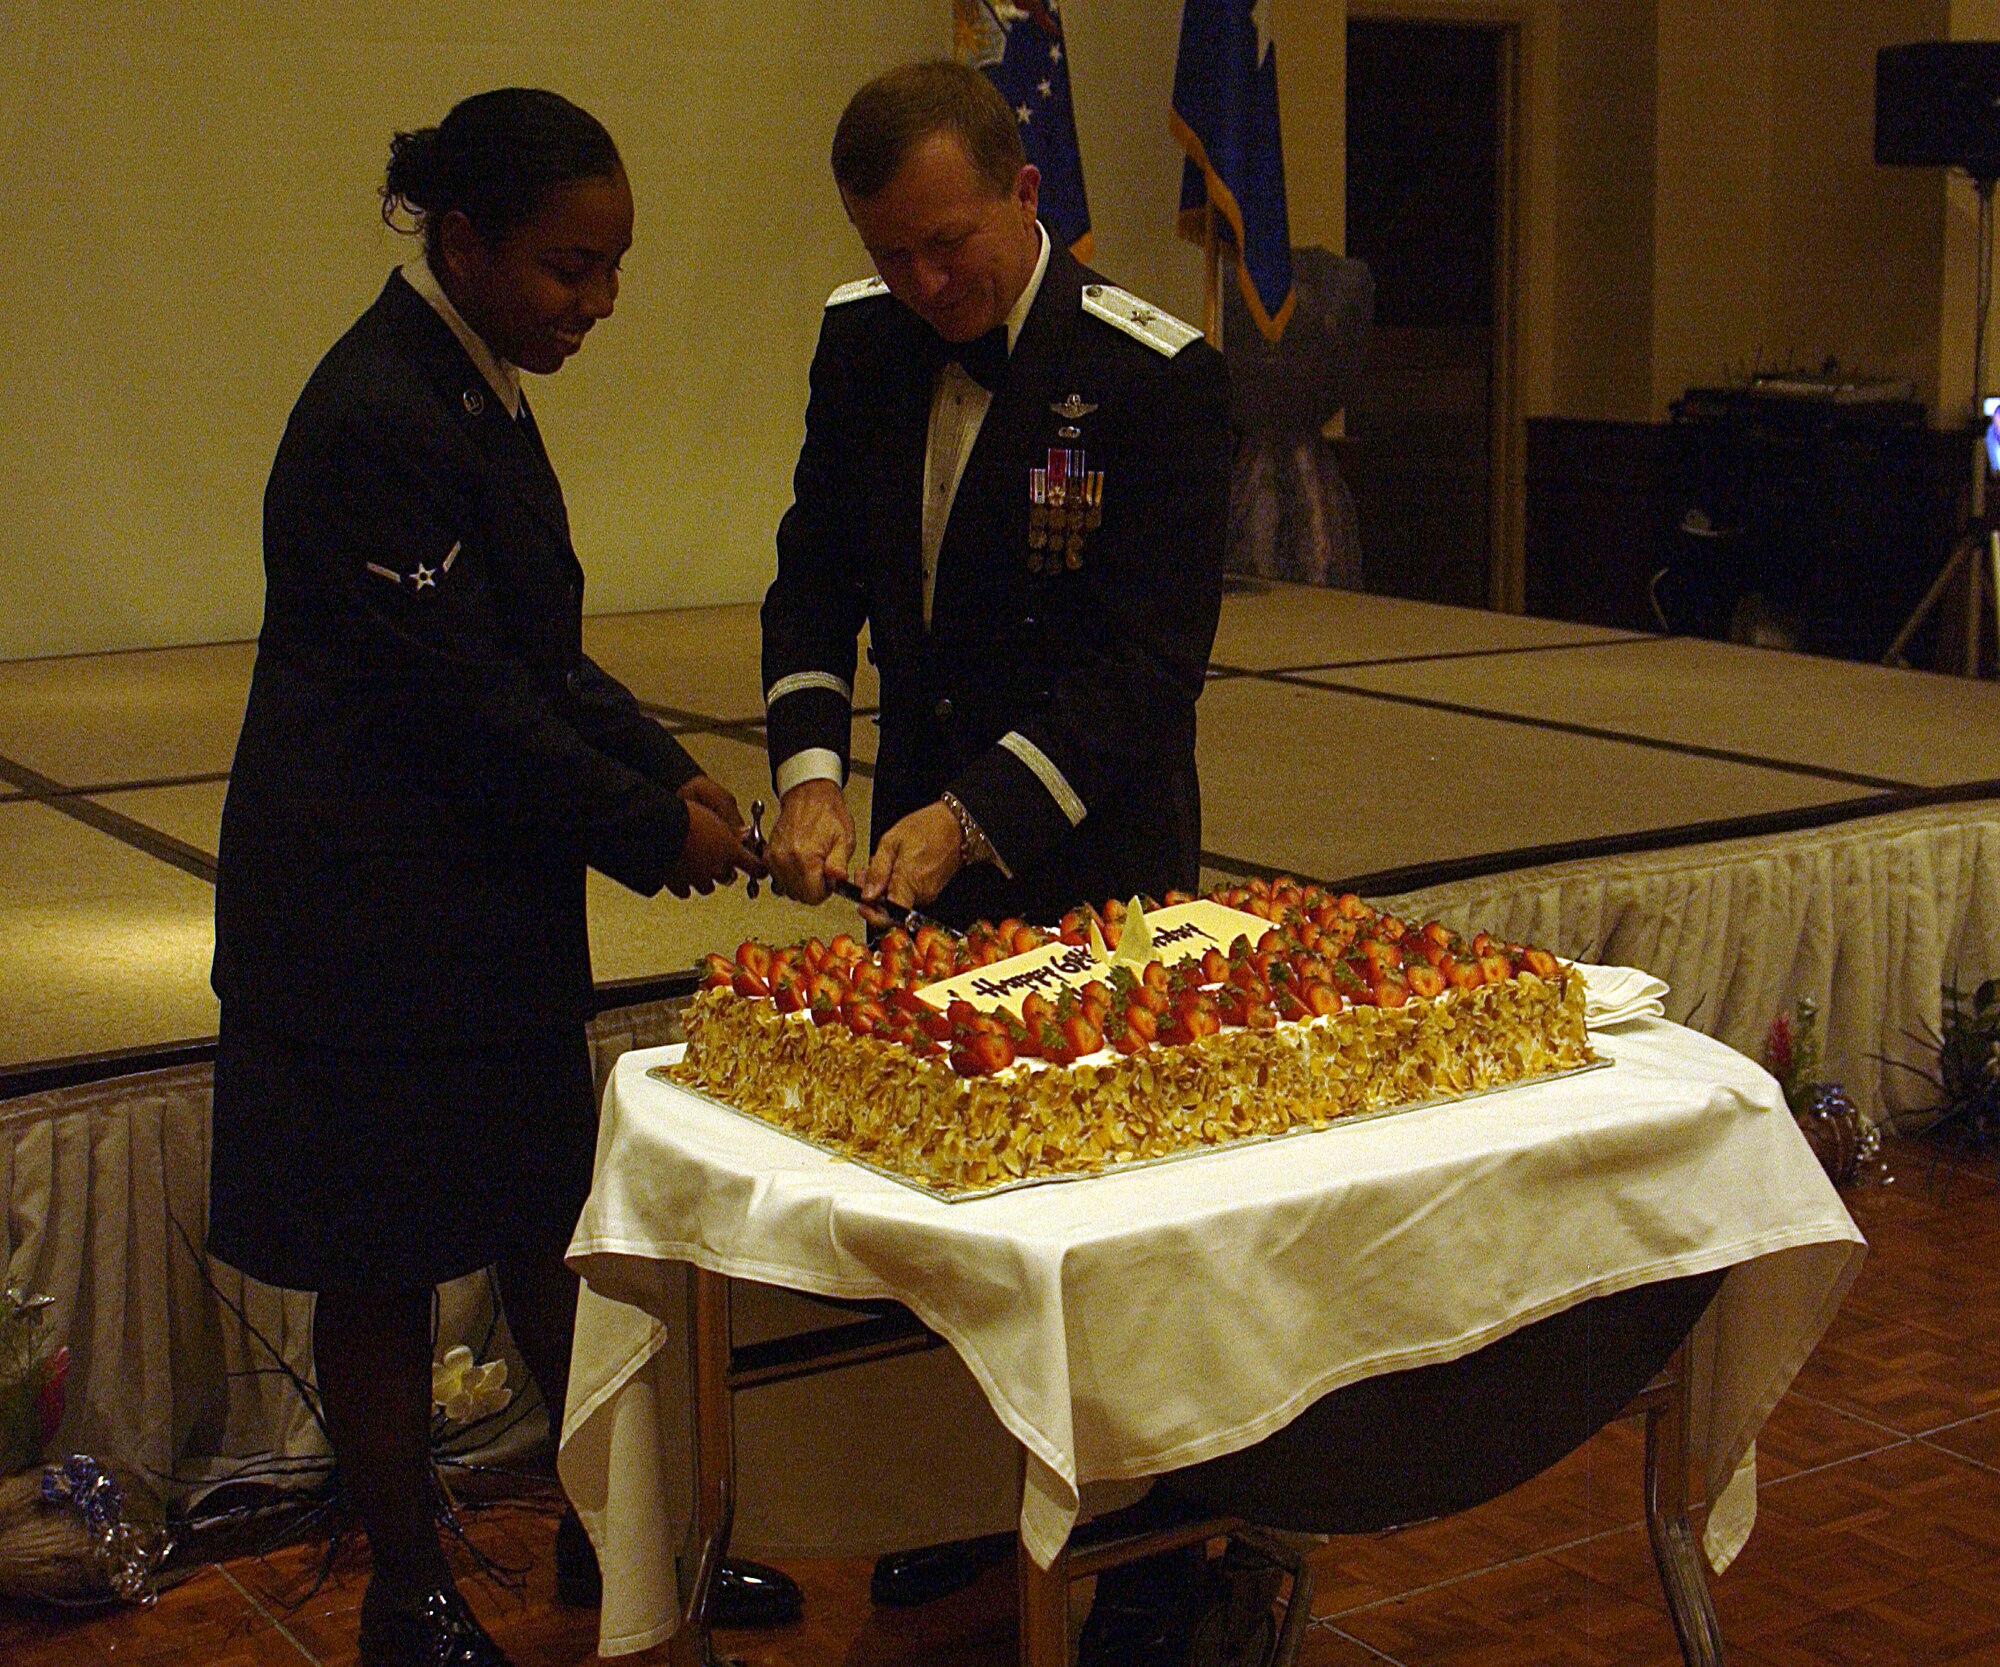 ANDERSEN AIR FORCE BASE, Guam - Brigadier Gen. Phil Ruhlman, 36th Wing commander, and the lowest ranking member attending the 61st Air Force Ball at the Hyatt Regency Guam cut the Air Force birthday cake Sept. 20. The theme for the ball was "Heritage of Change." (U.S. Air Force photo by Airman 1st Class Carissa Wolff)              